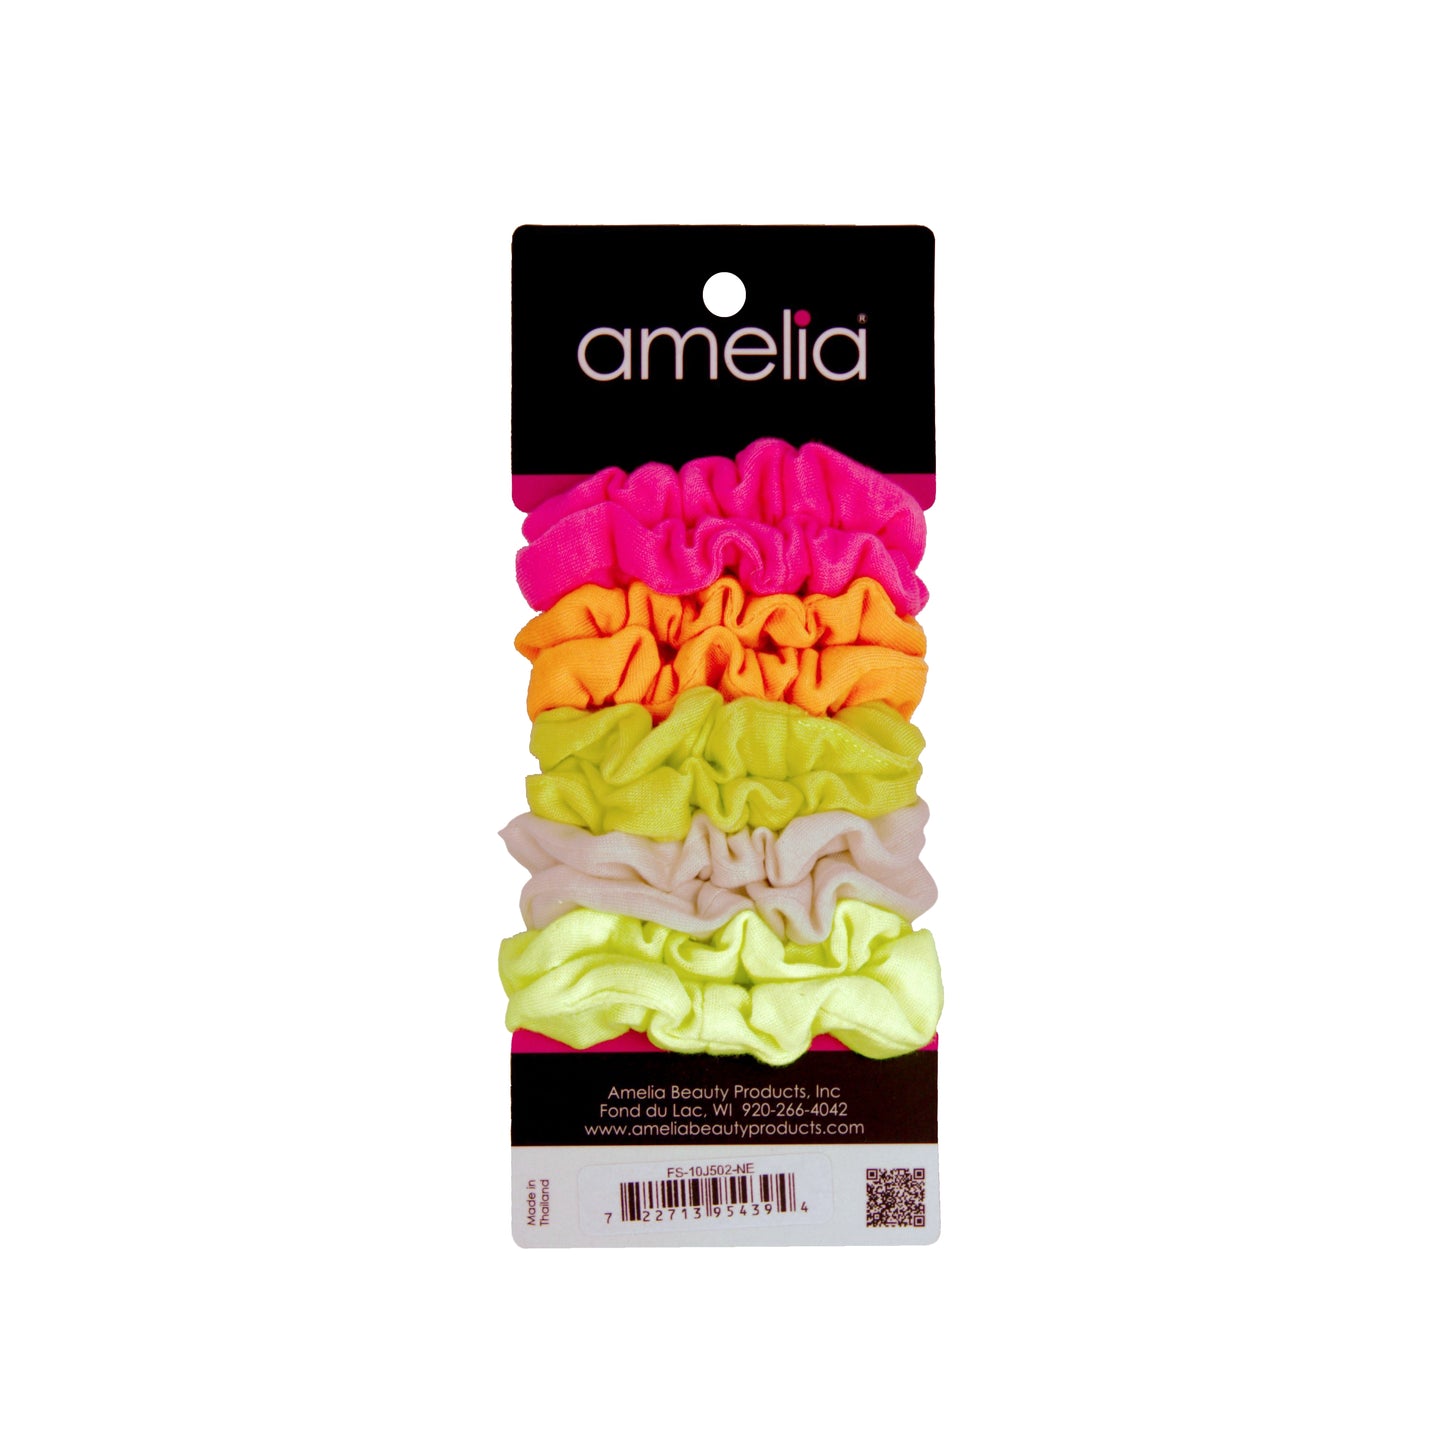 Amelia Beauty, Medium Neon Jersey Scrunchies, 2.5in Diameter, Gentle on Hair, Strong Hold, No Snag, No Dents or Creases. 10 Pack